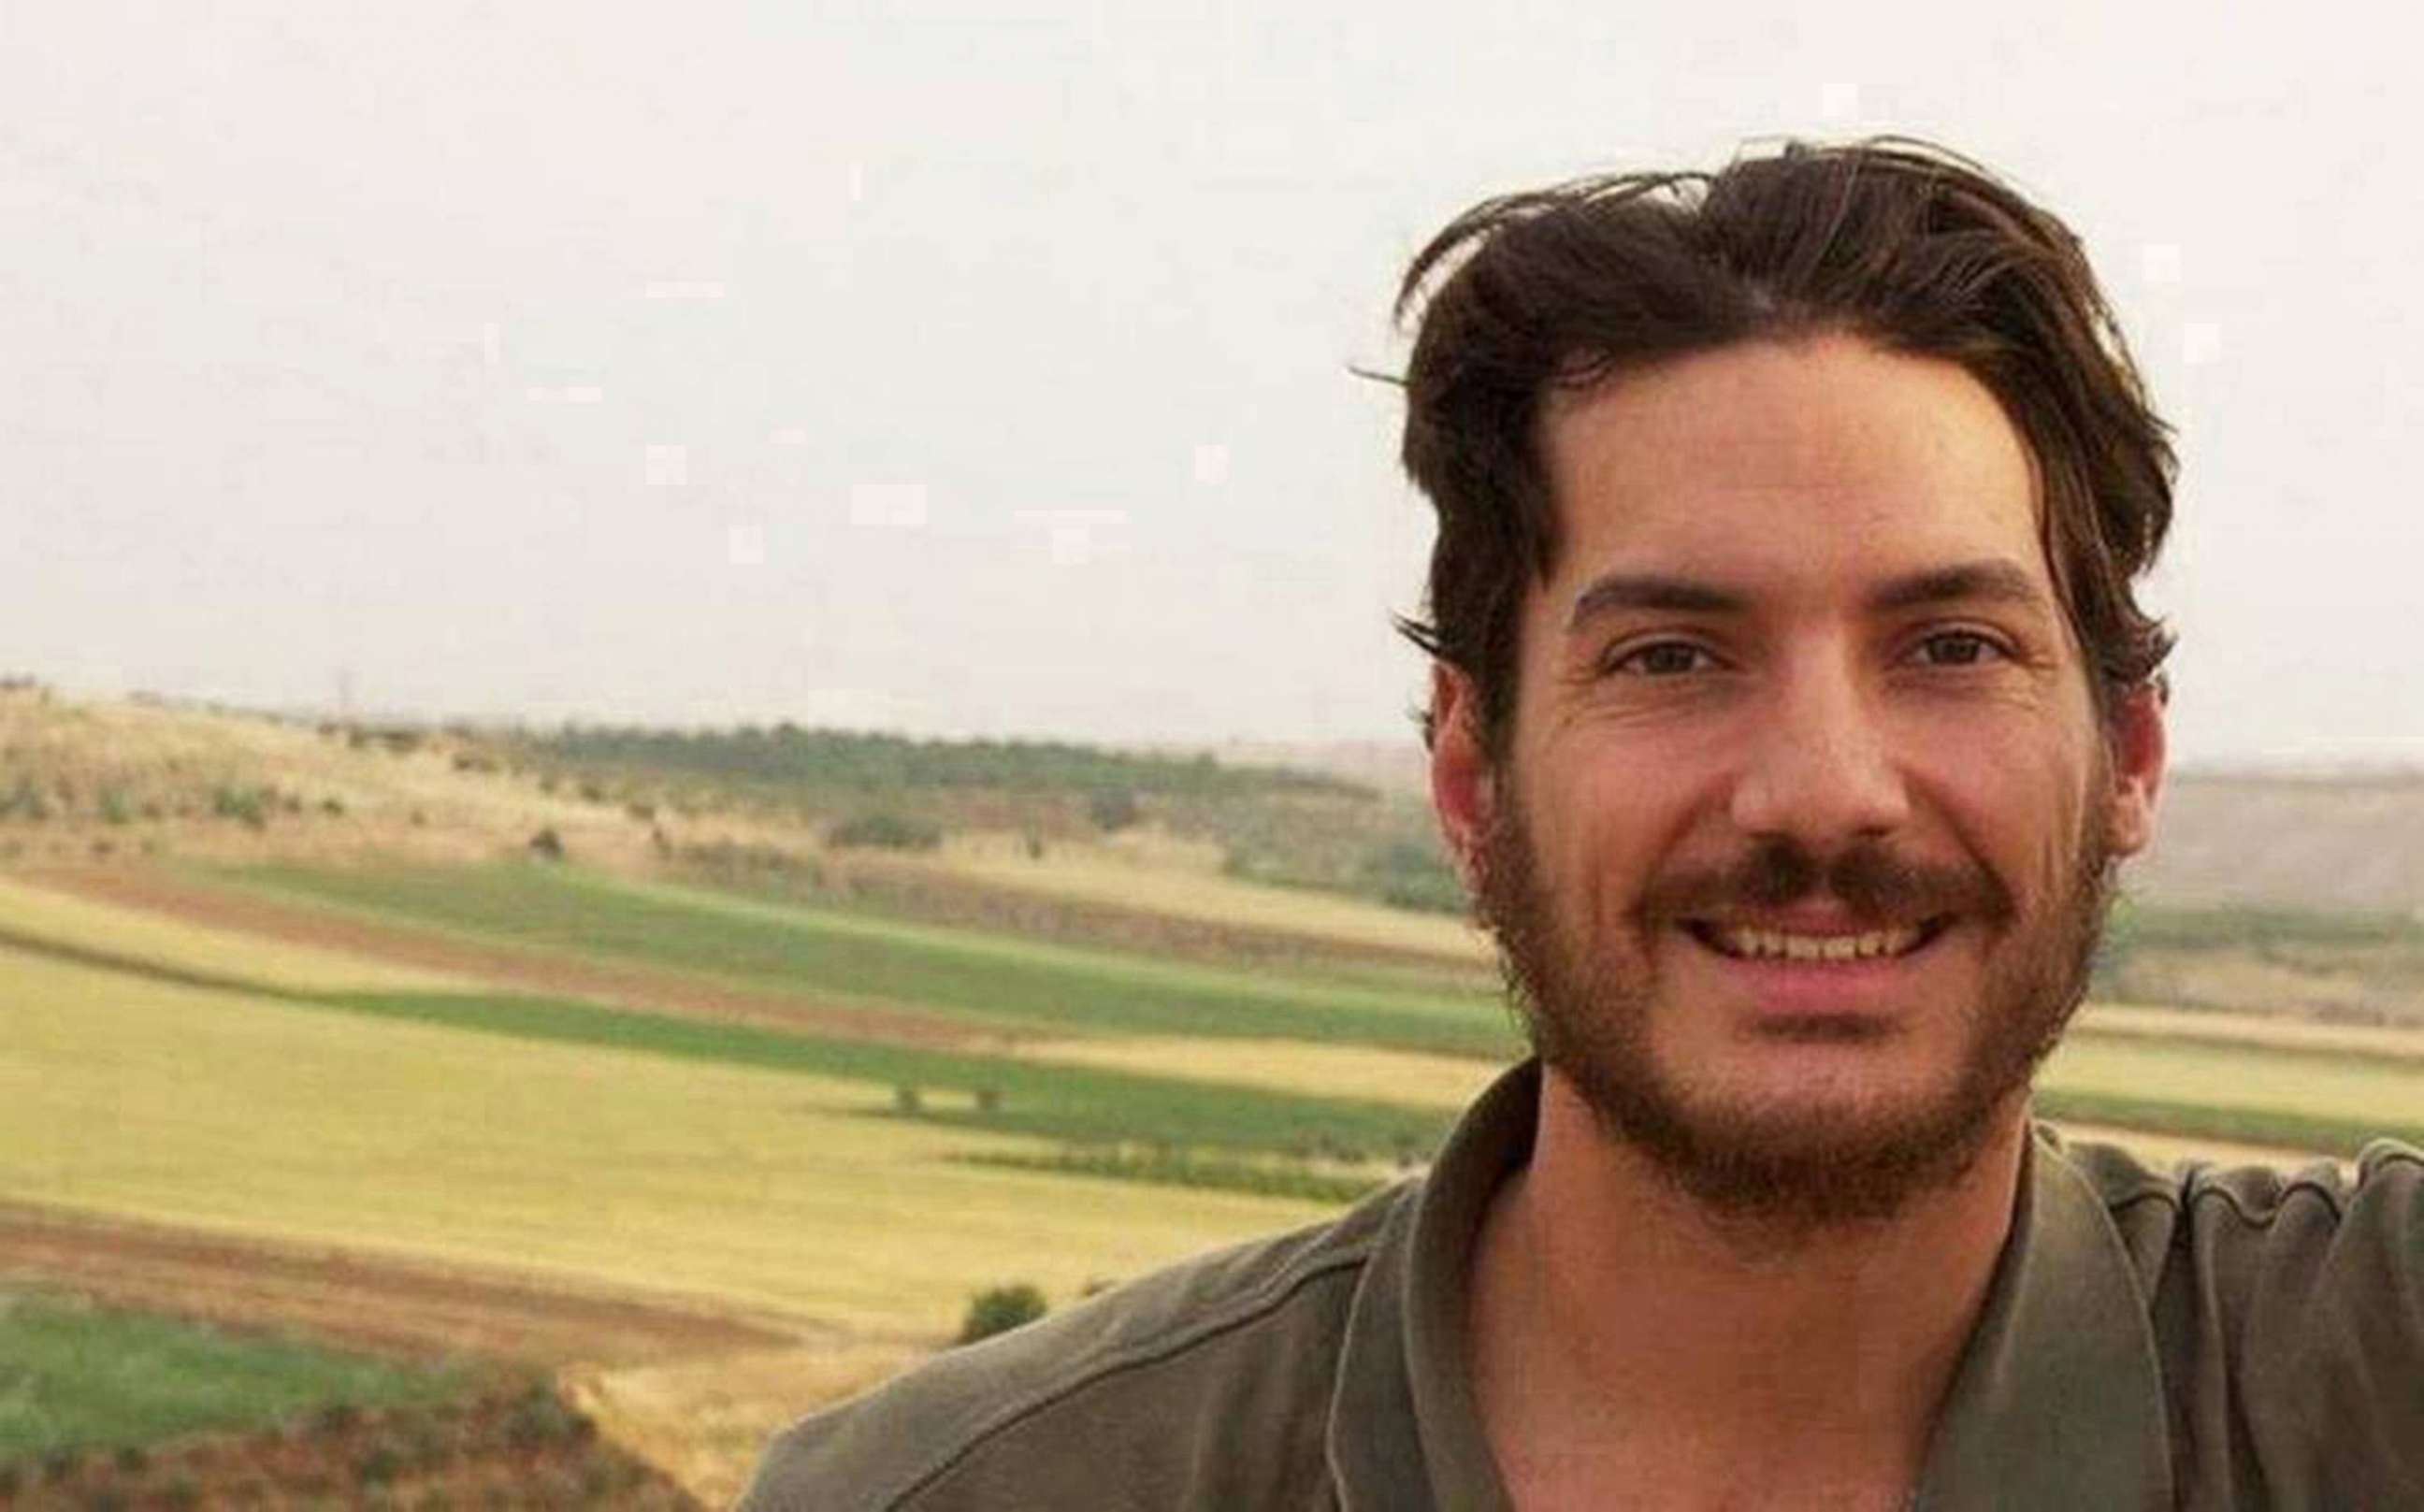 PHOTO: Freelance journalist Austin Tice went missing in Syria in 2012 and has not been heard from since.